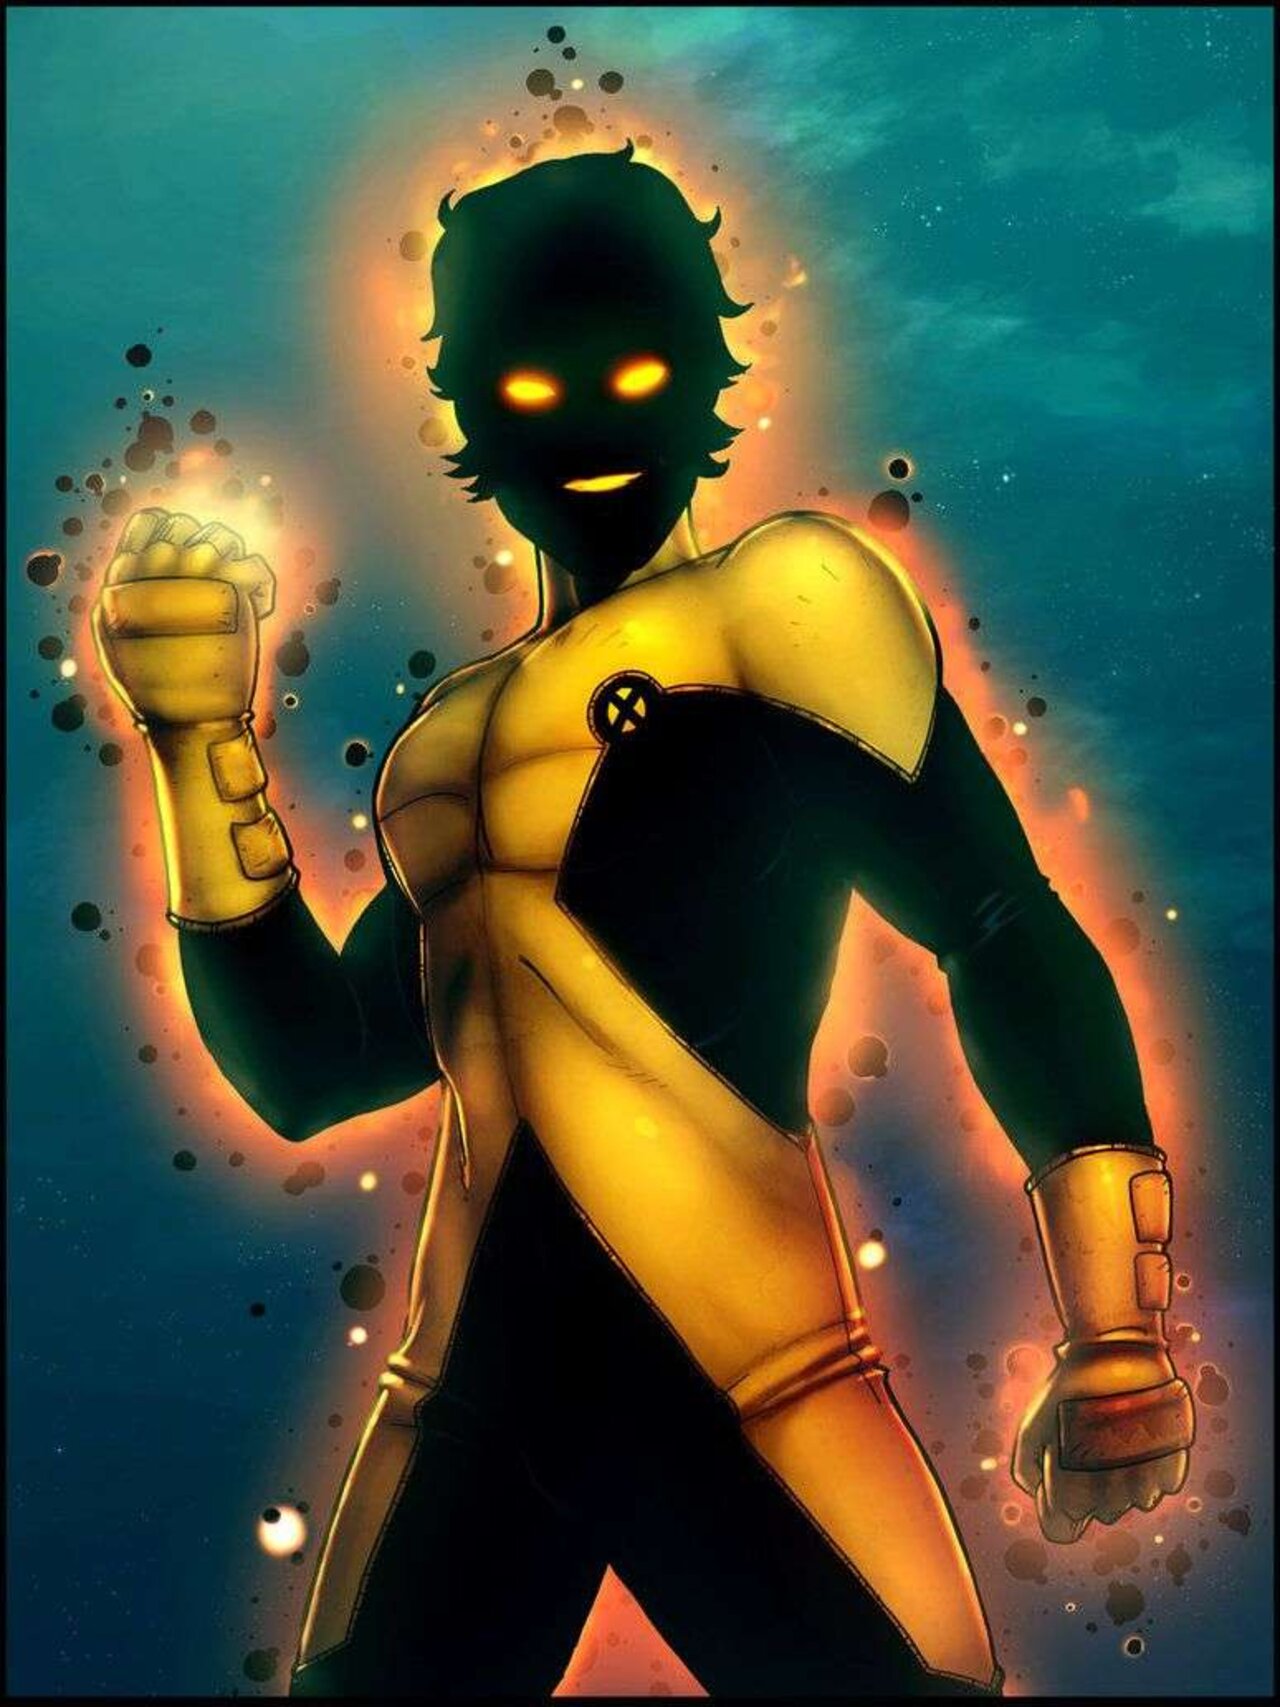 The Whitewashing of Sunspot. The New Mutants has whitewashed the…, by  Latinx Geeks